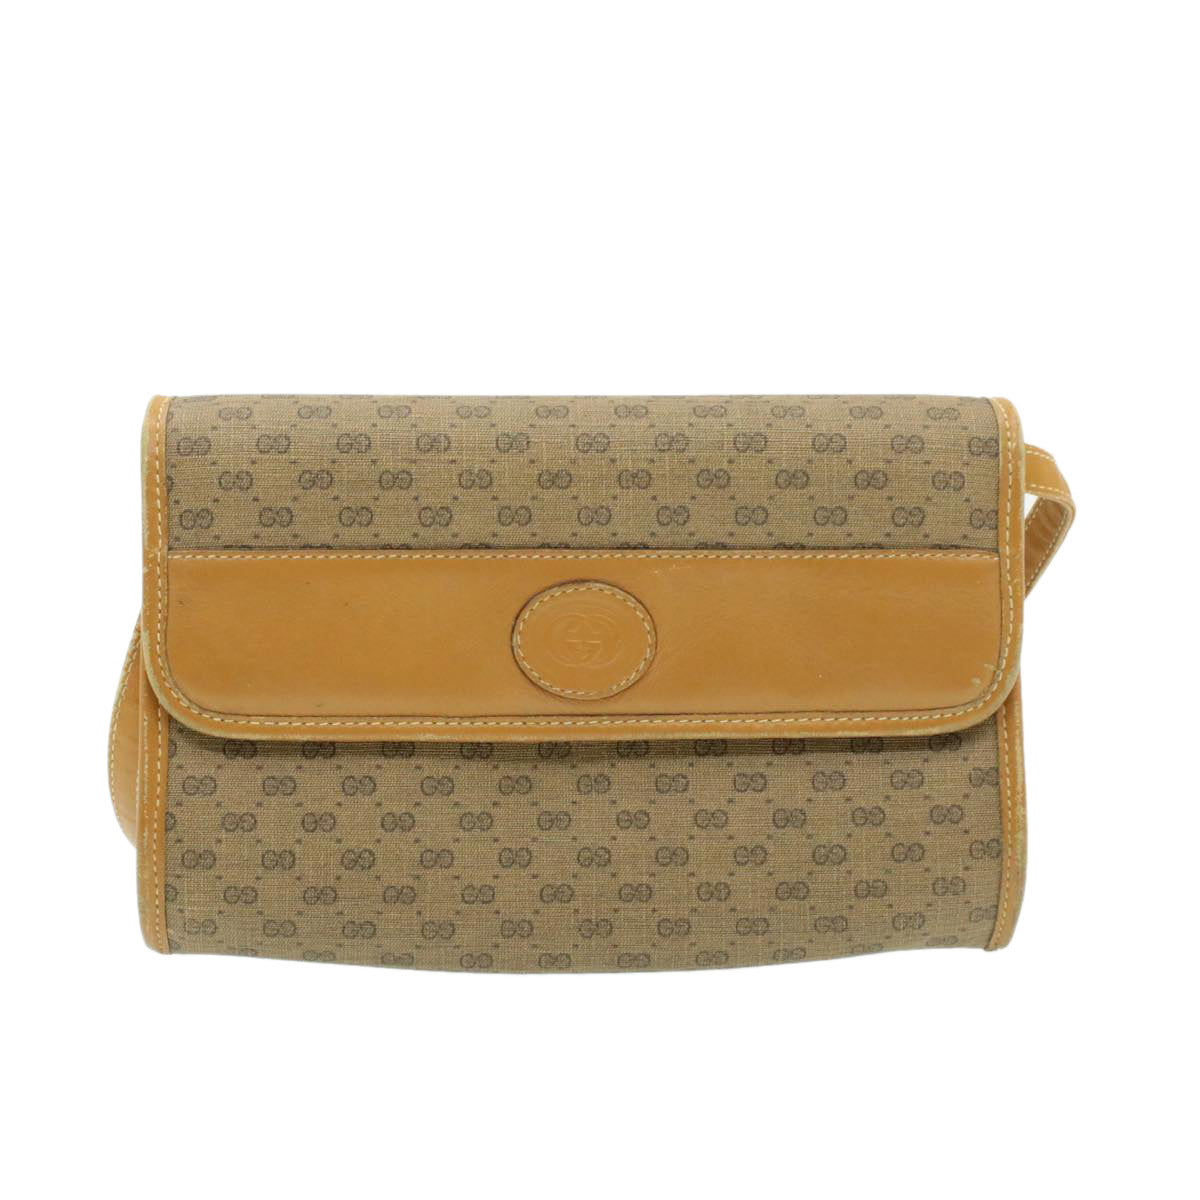 GUCCI Micro small PVC Leather Shoulder Bag Beige Auth am064g